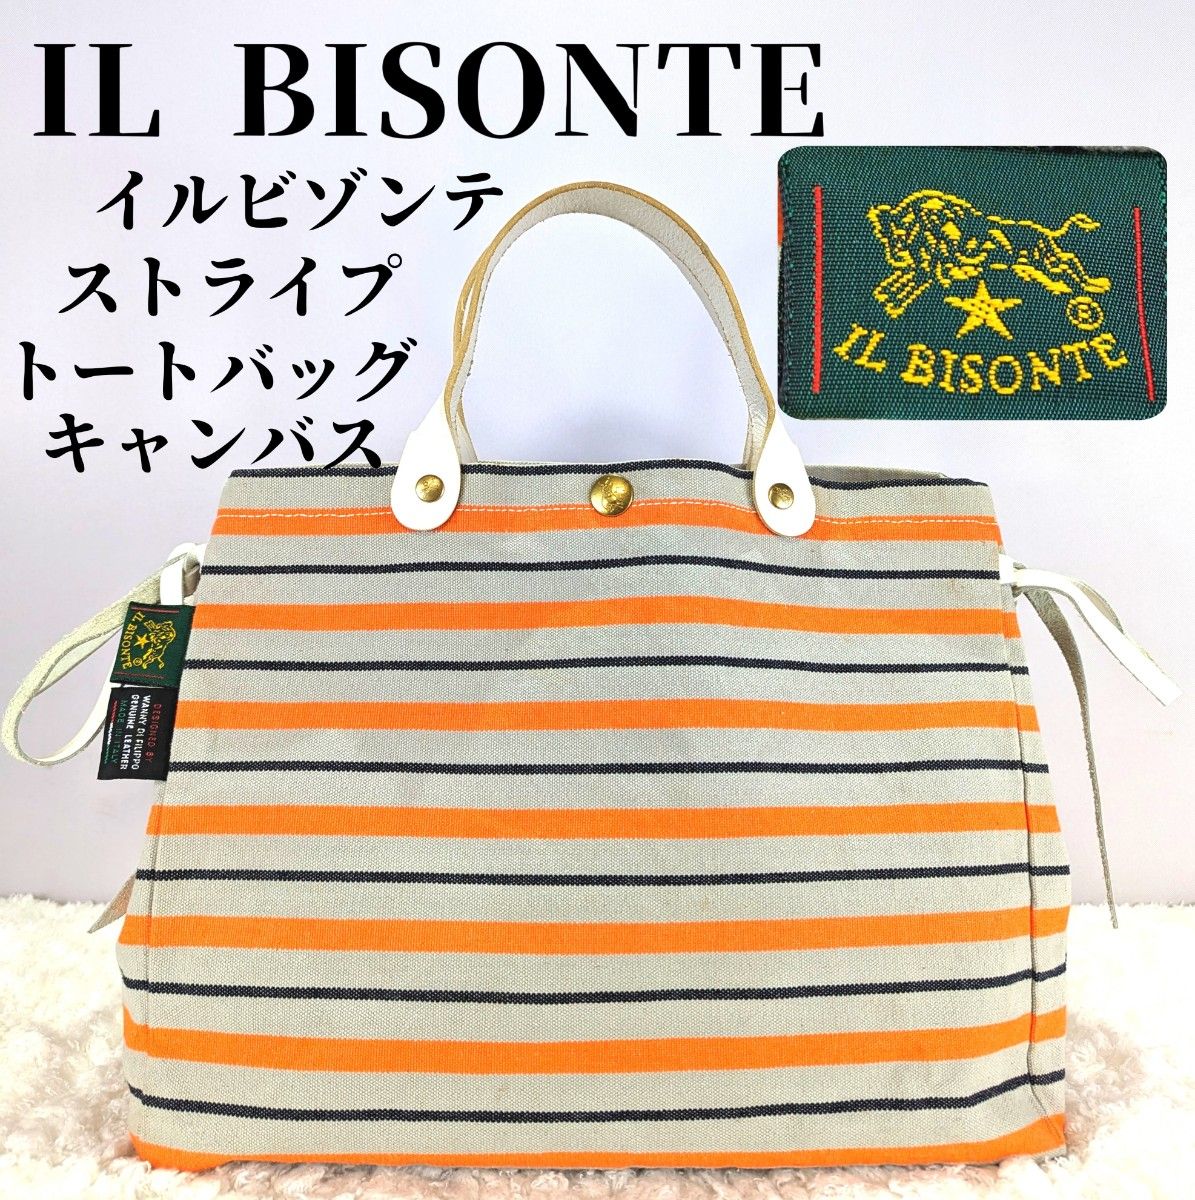 IL BISONTE イルビゾンテ トートバッグ